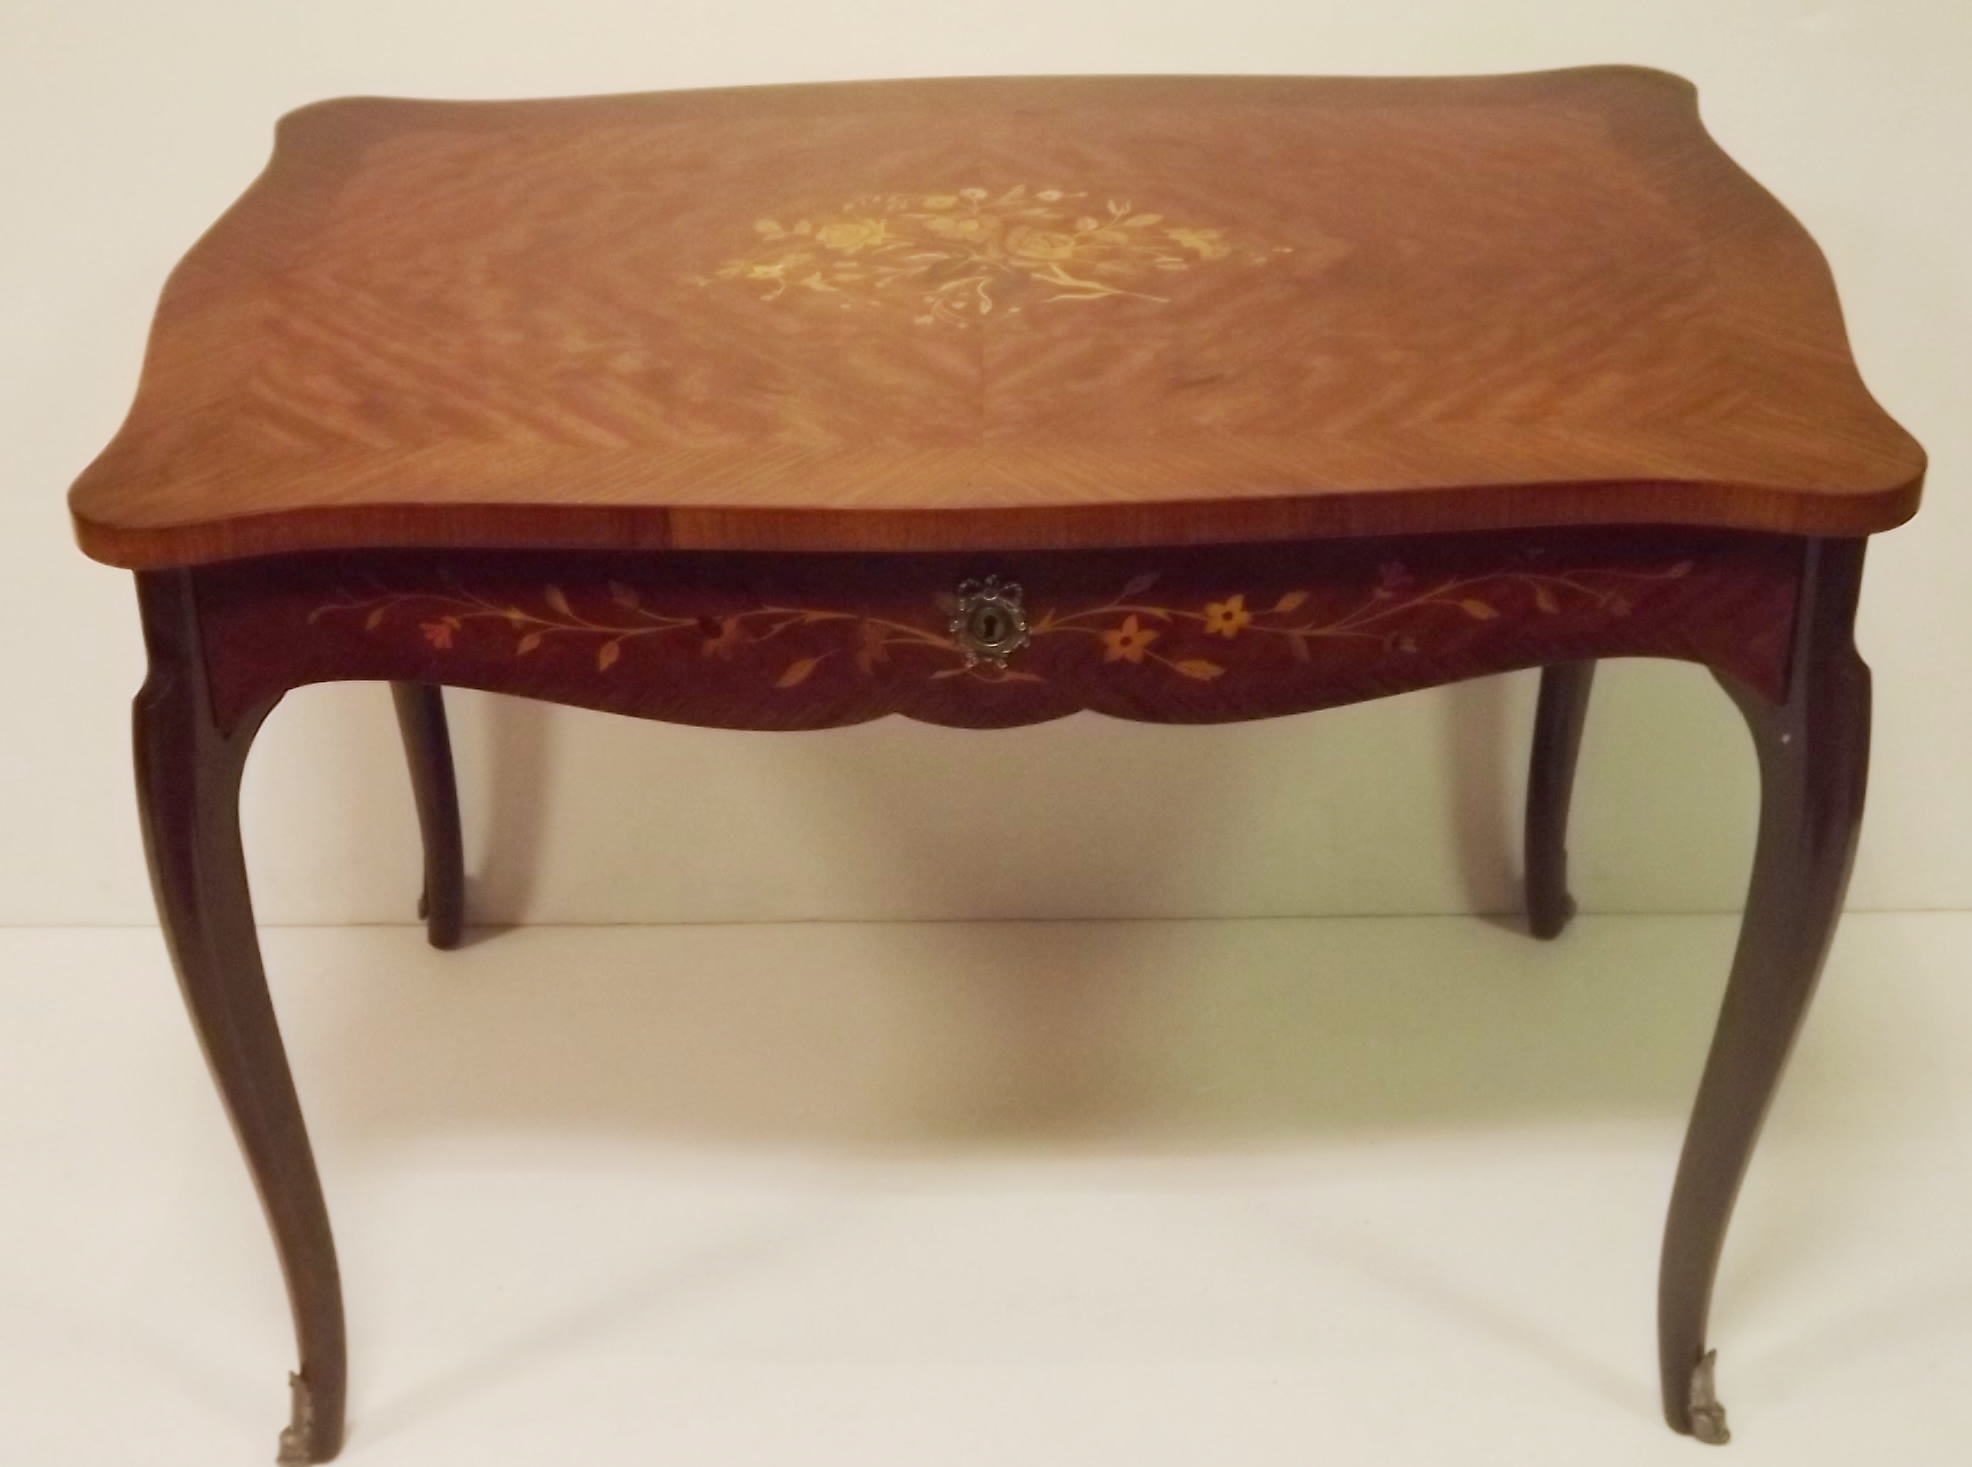 Excellent Quality French Inlaid Kingwood